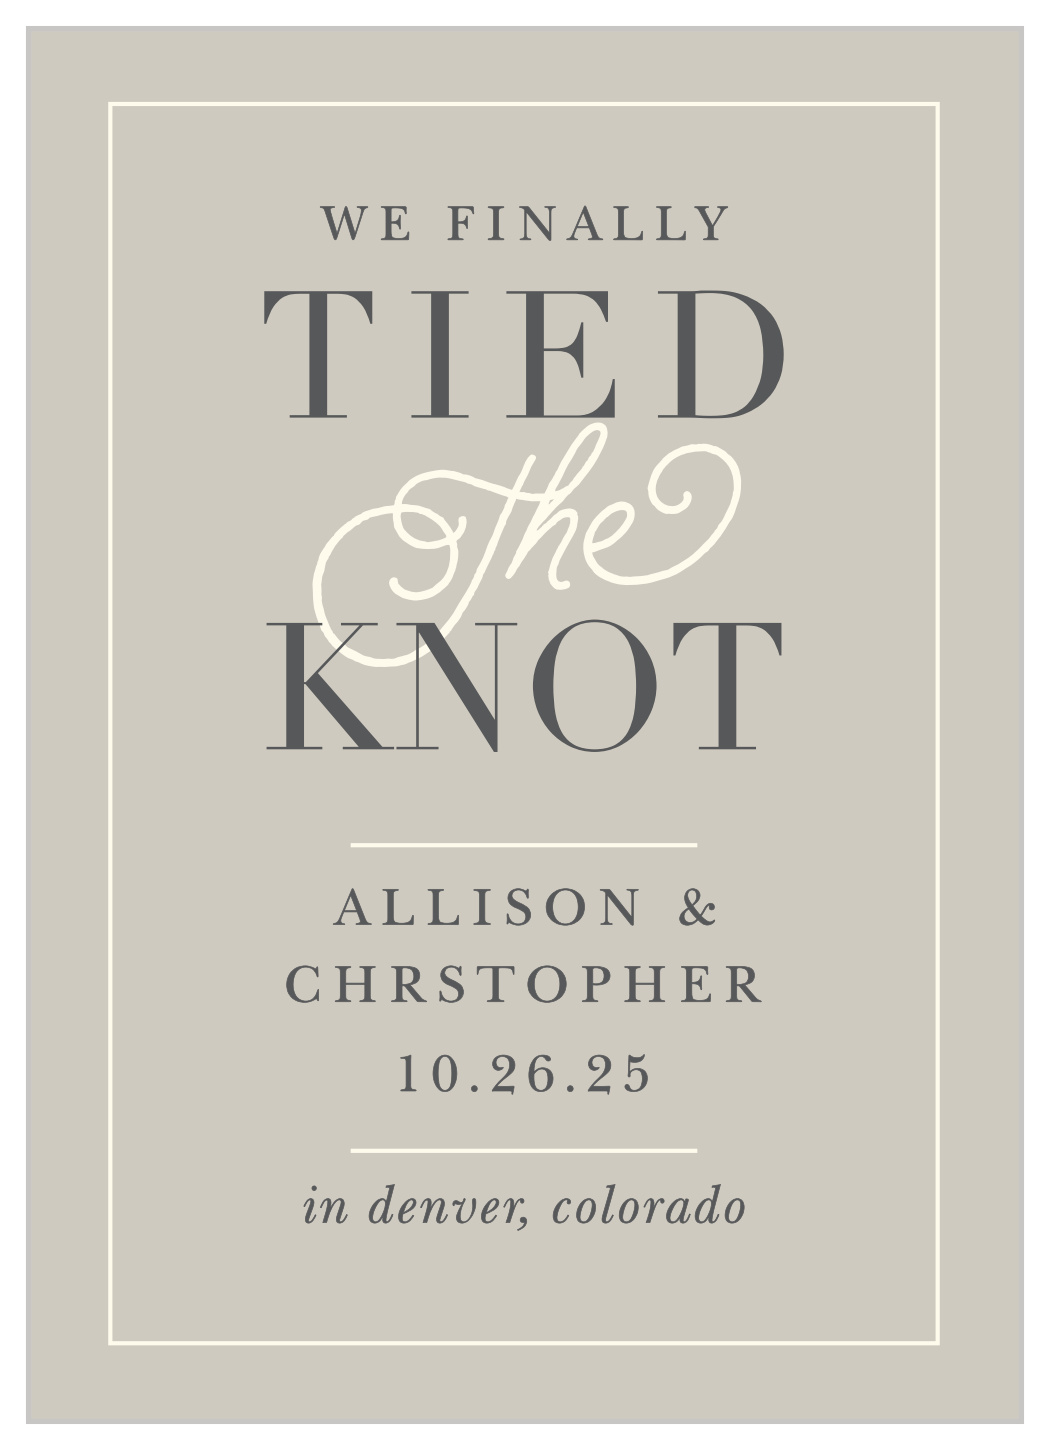 Tied the Knot Wedding Announcements